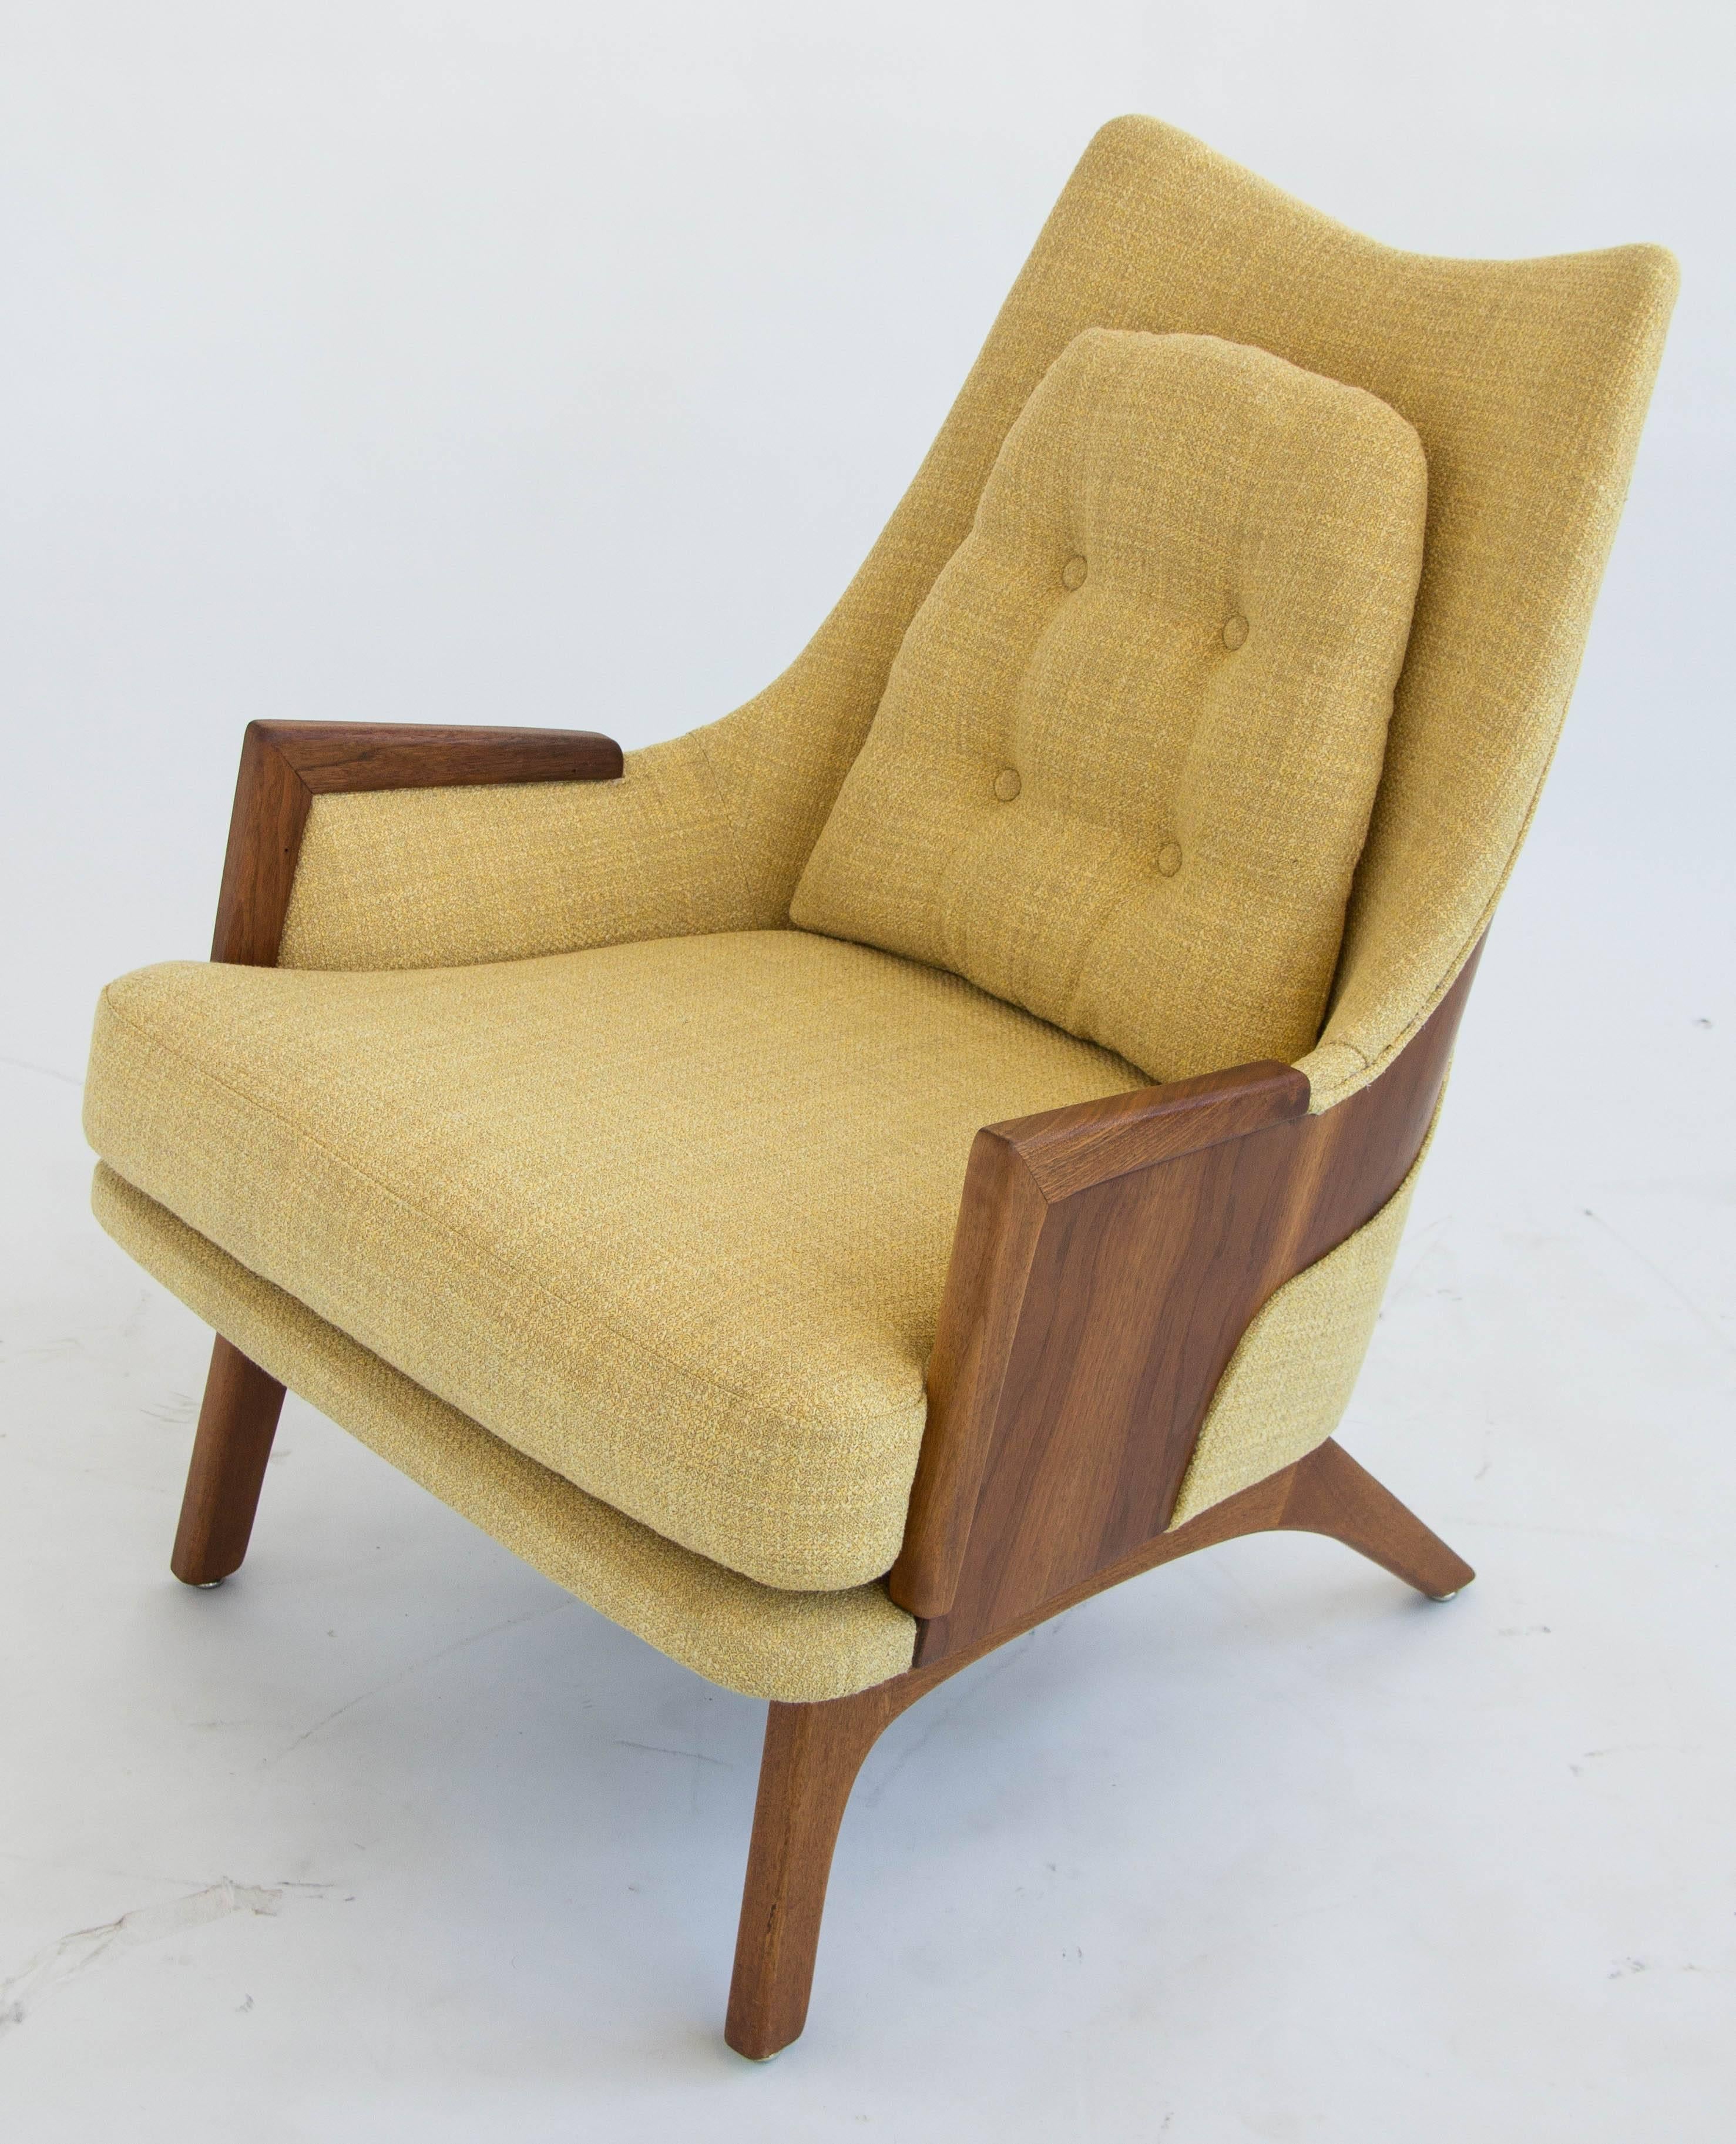 This lounge chair features a distinctive “wrapped” detail, where the walnut wood frame is exposed in a sculpted band across the backside of the chair.  The piece was reupholstered in a butter yellow tweed that contrasts beautifully with the